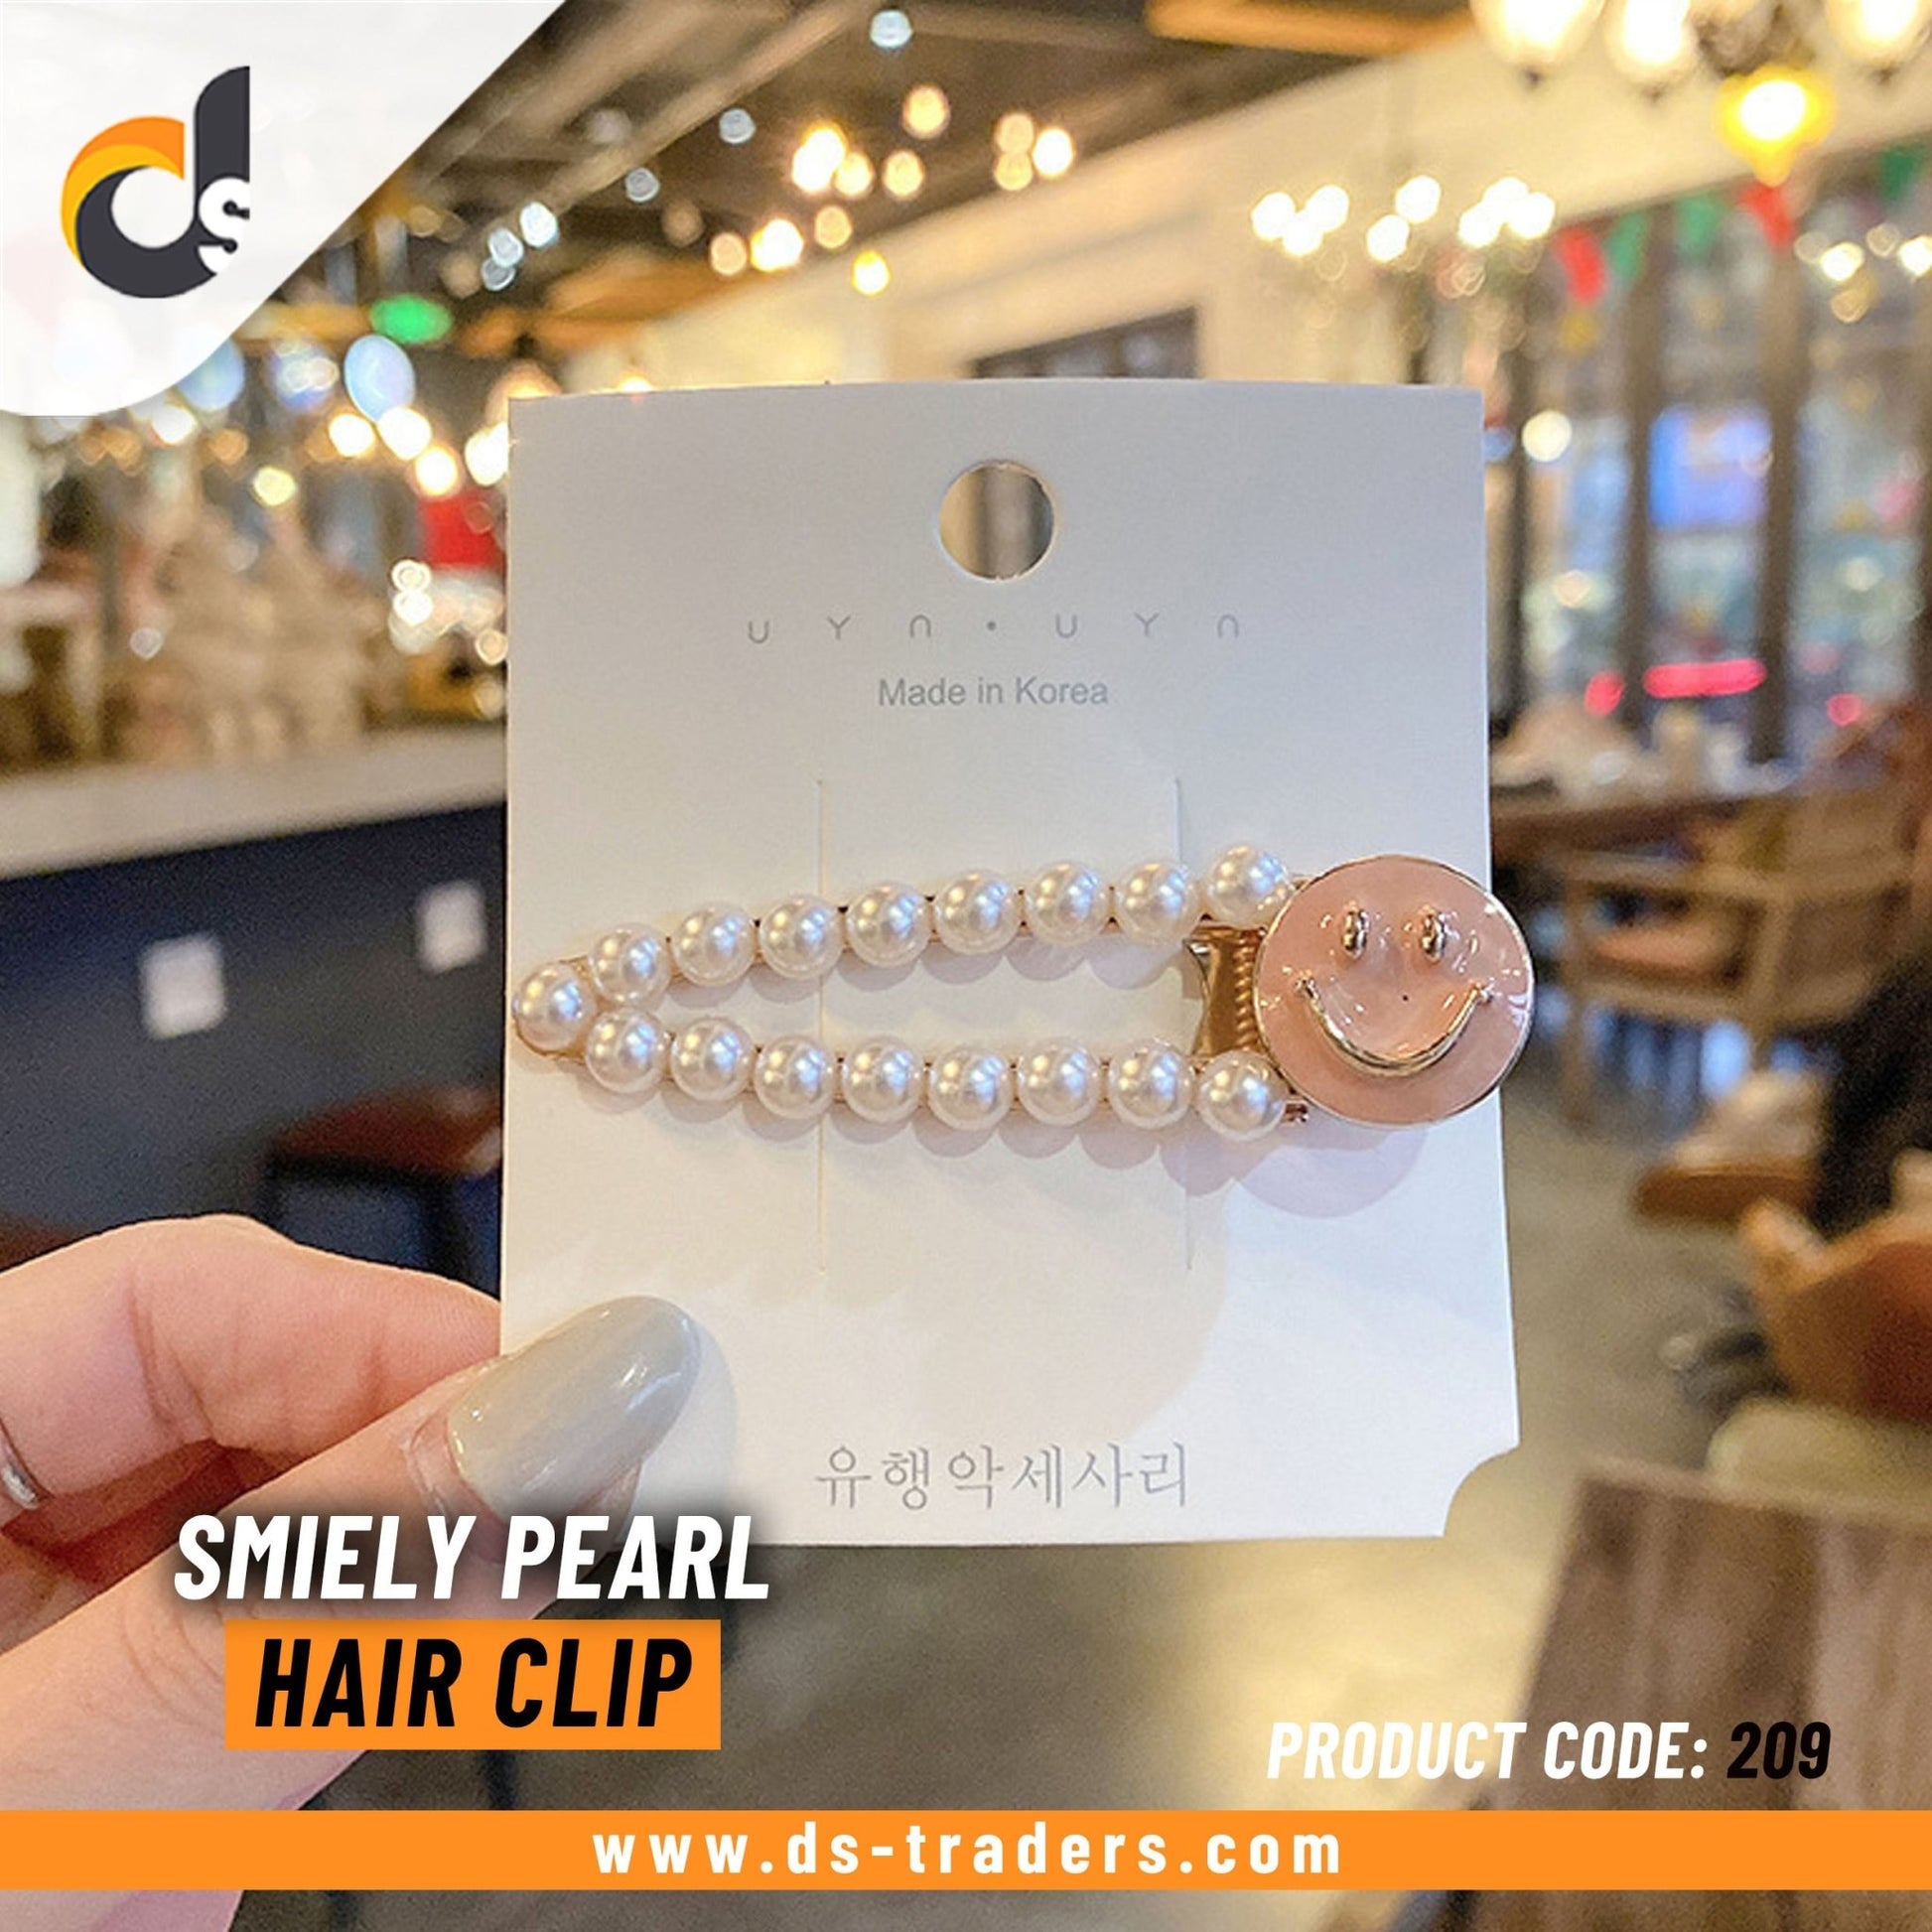 Smiley Pearl Hair Clip - DS Traders